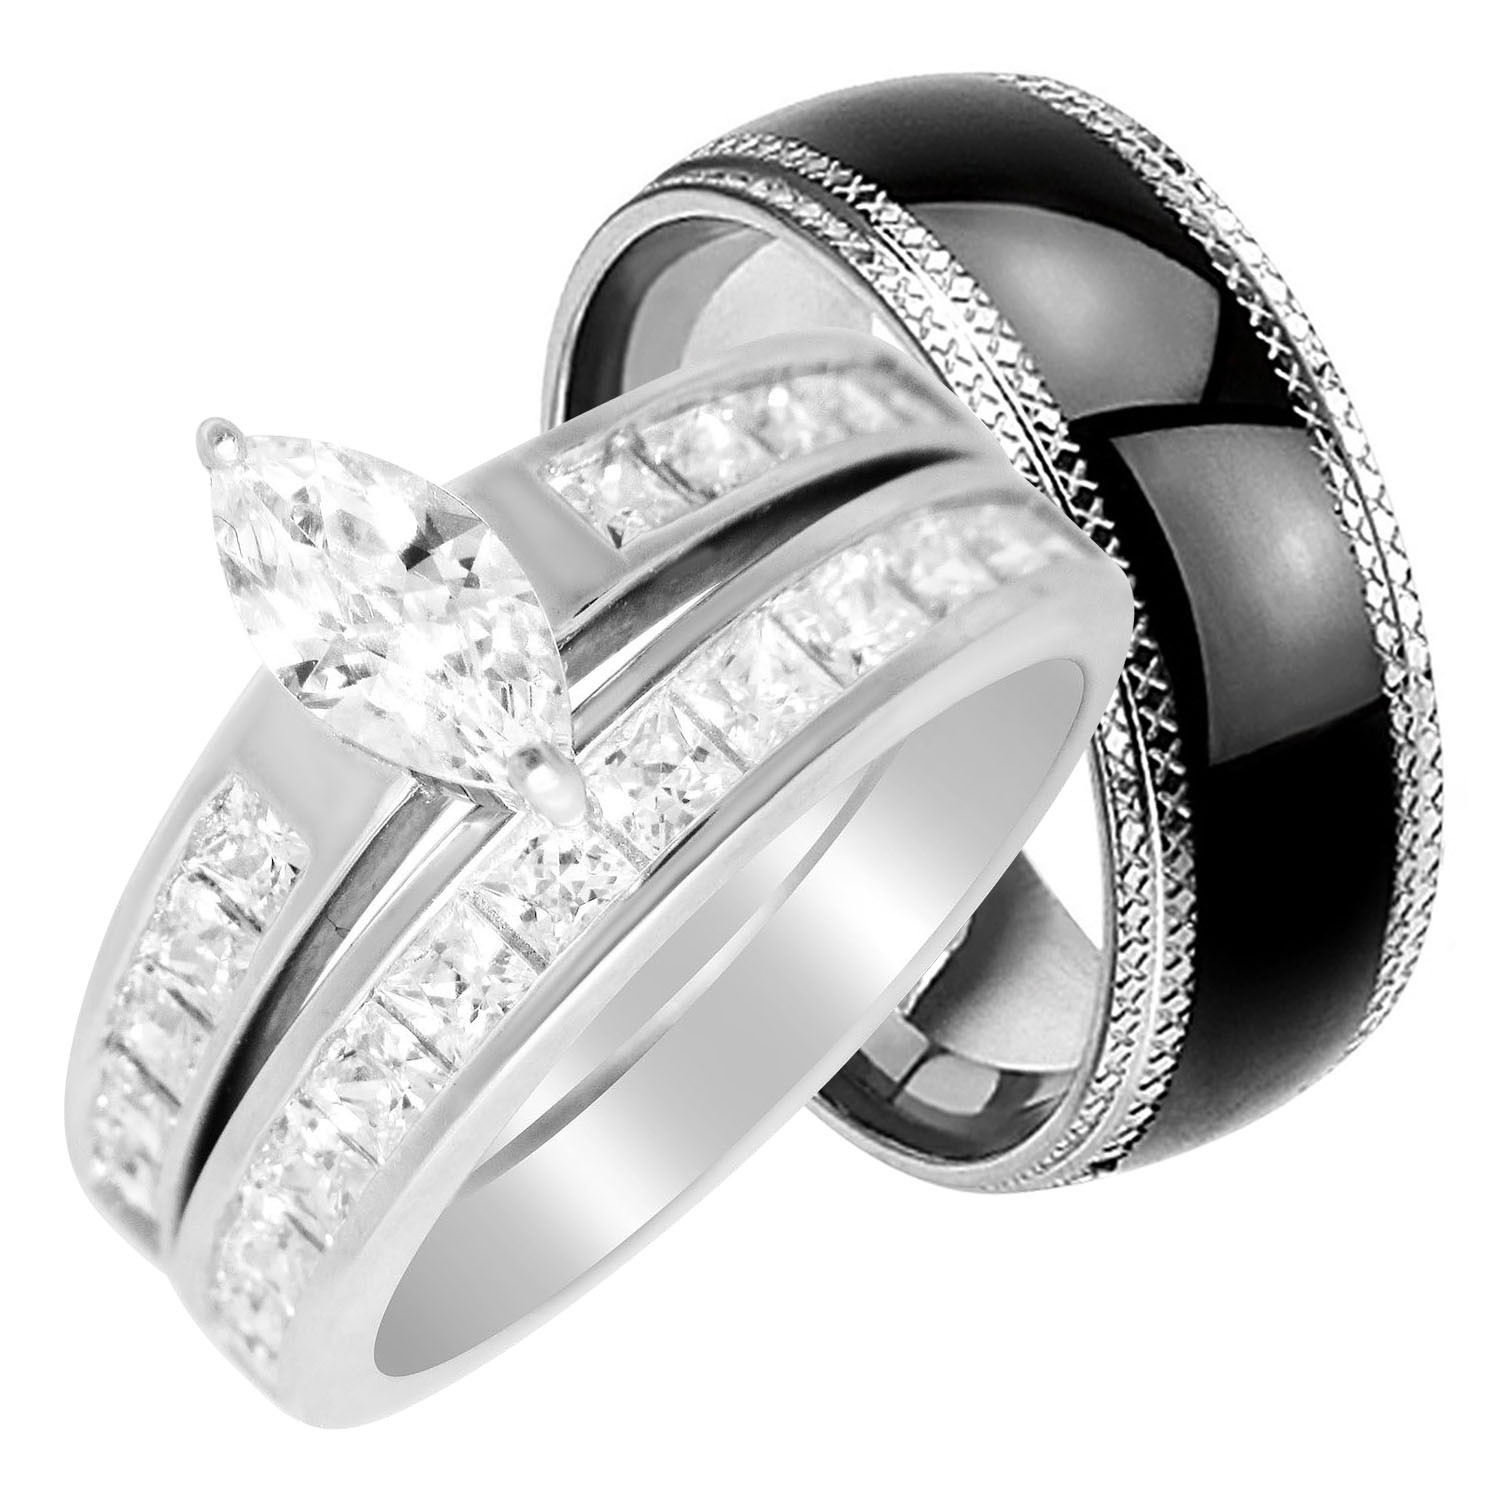 Cheap Wedding Rings For Her And Him
 LaRaso & Co His Hers Wedding Rings Set Cheap Matching